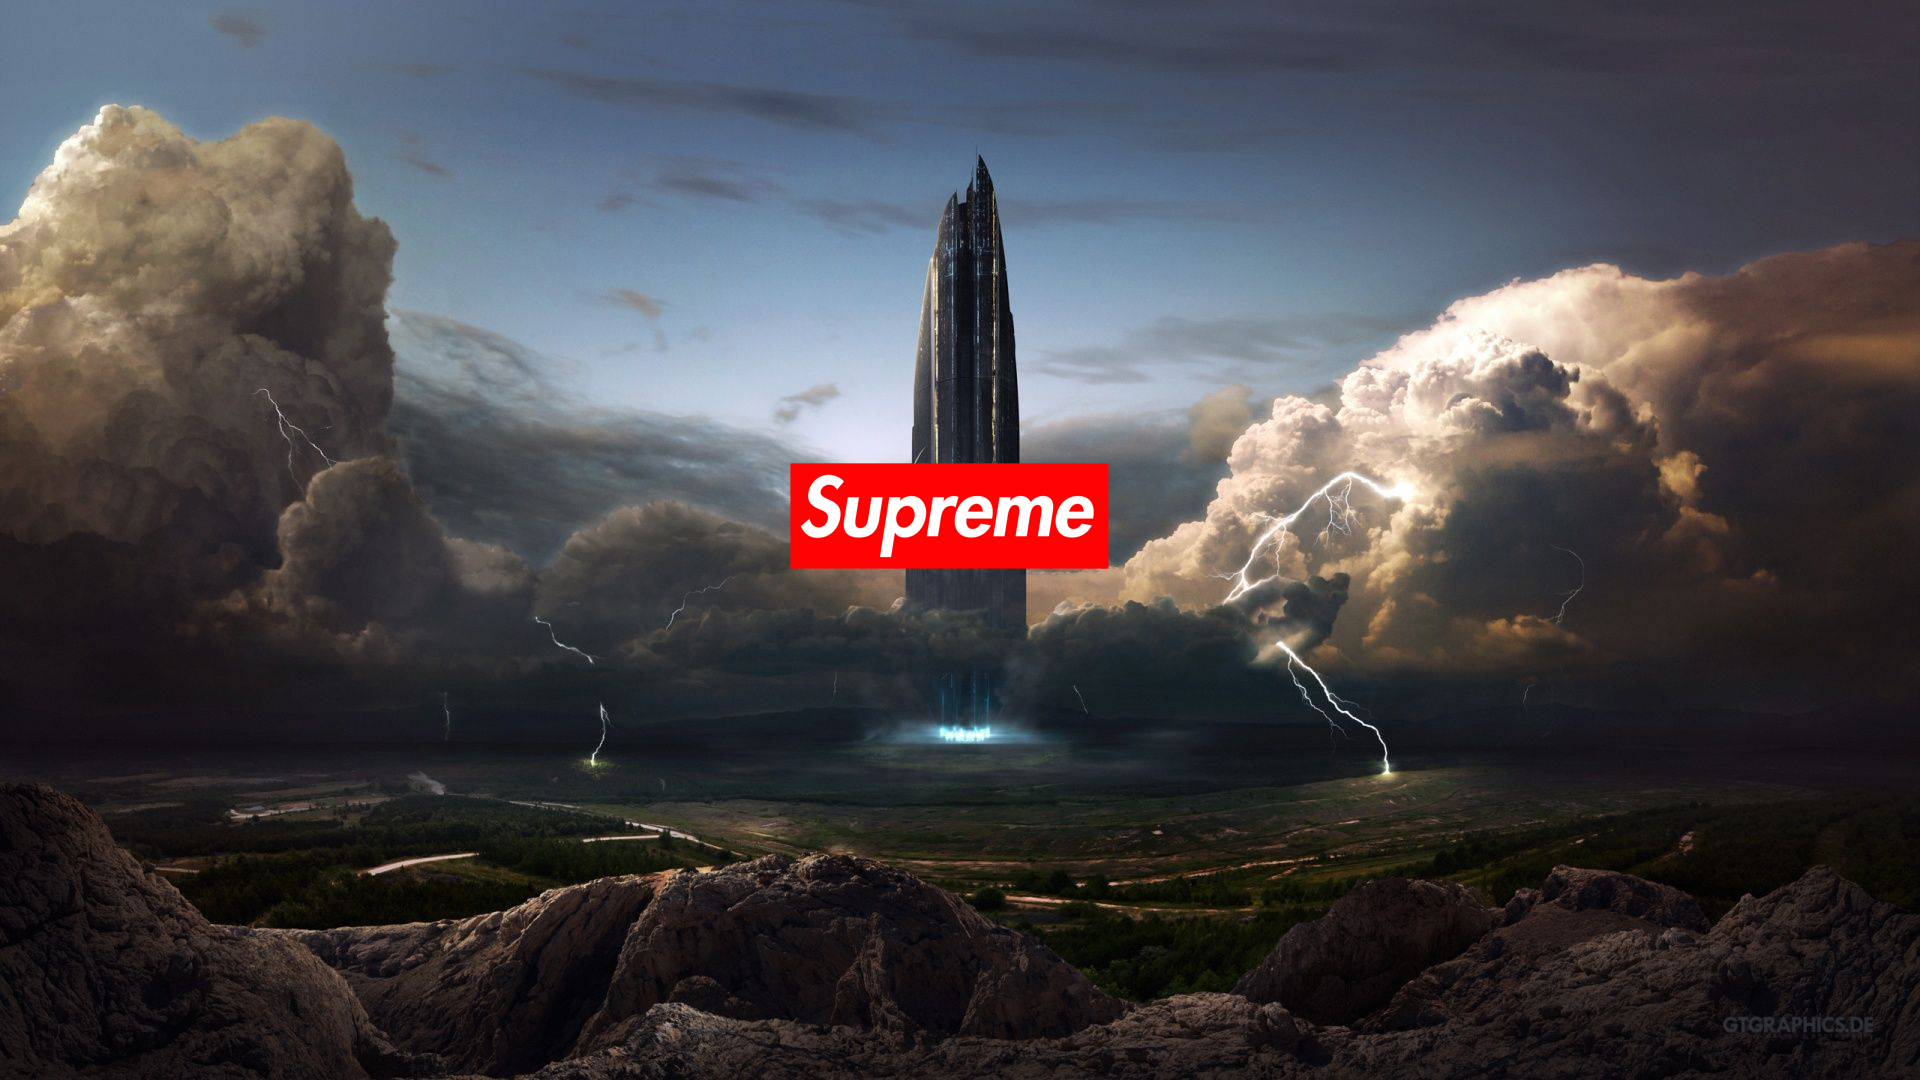 Cool Supreme Wallpapers Free download 